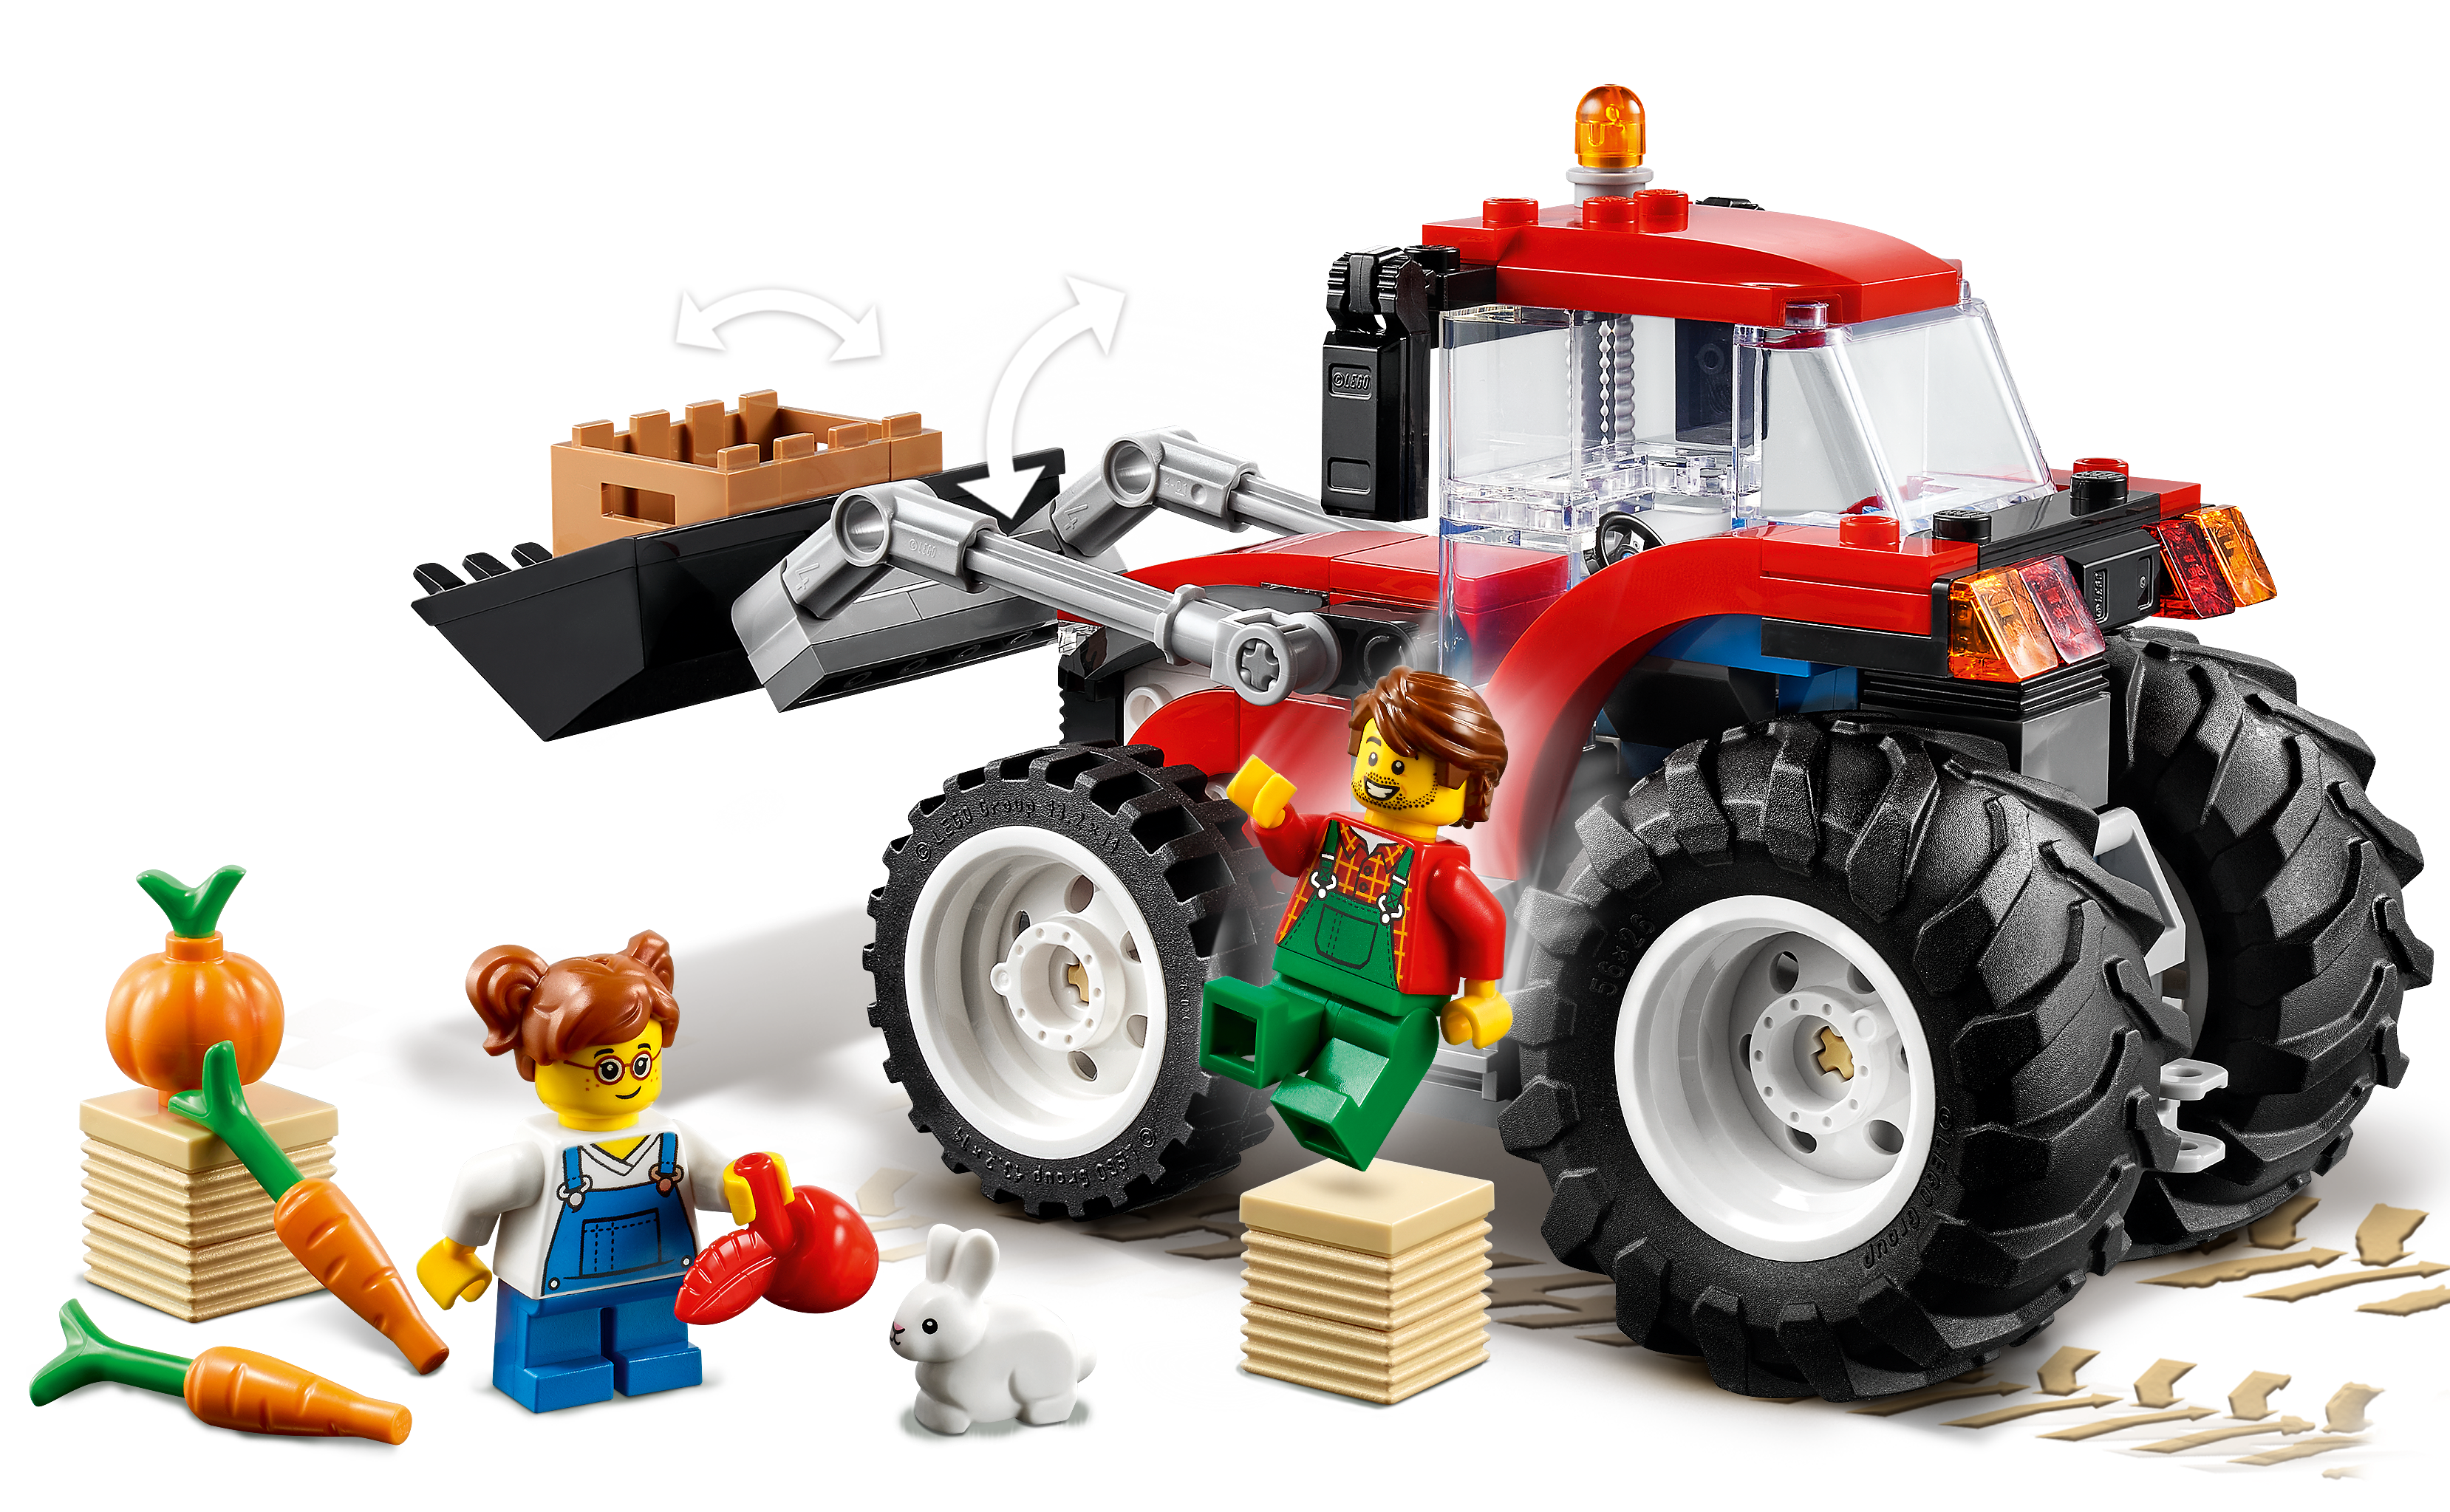 New 2021 148 Pieces LEGO City Tractor 60287 Building Kit; Cool Toy for Kids 